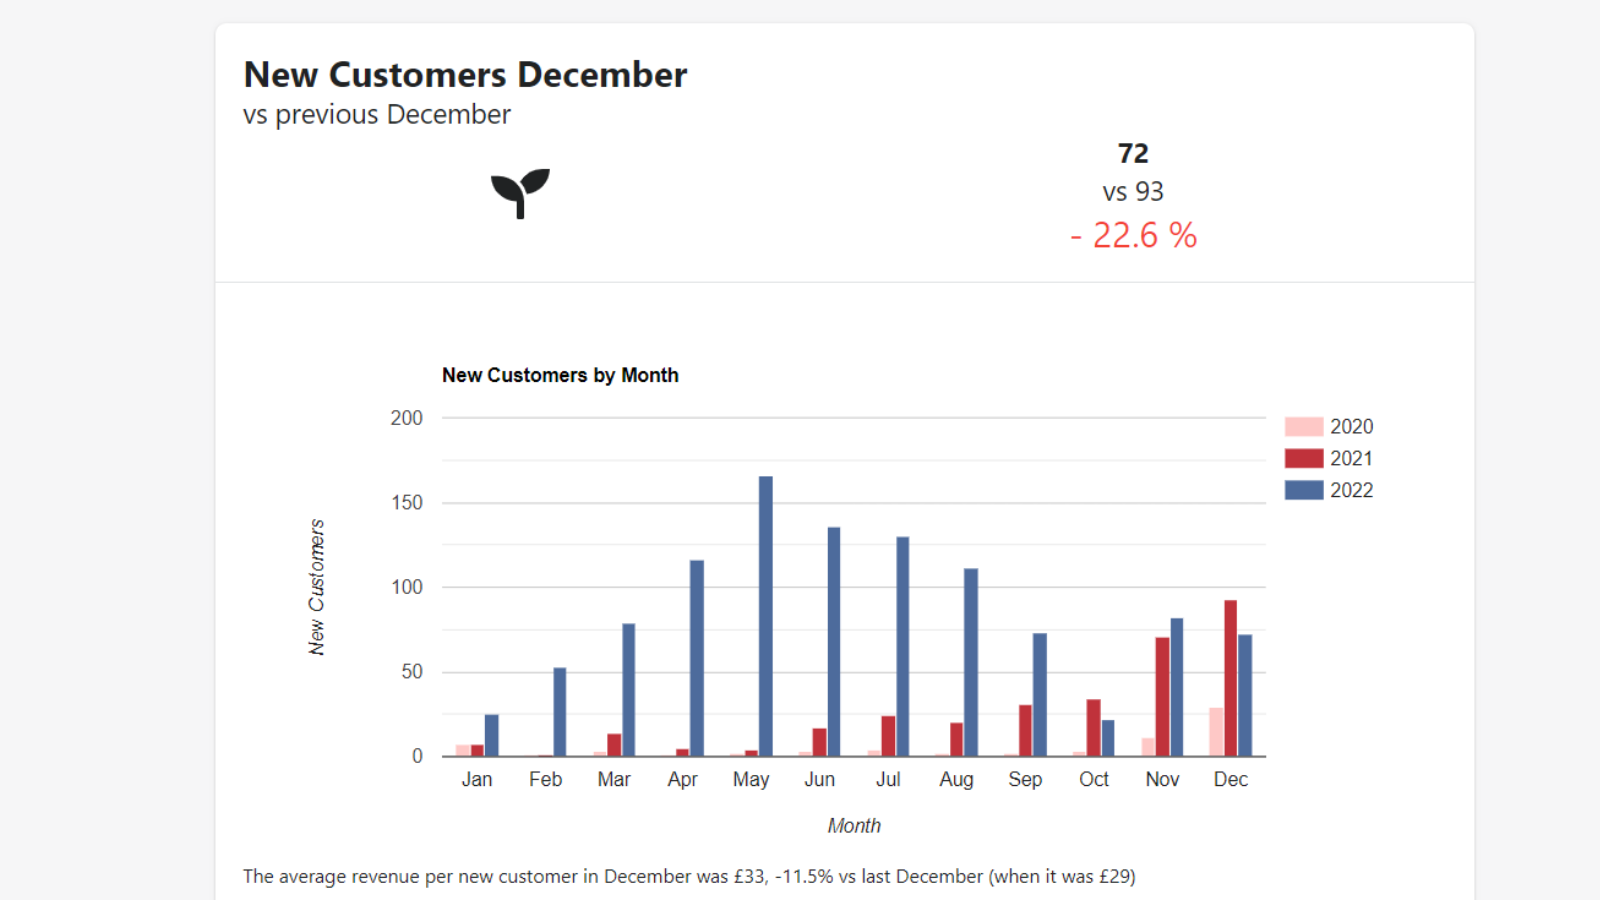 Number of new customers per month